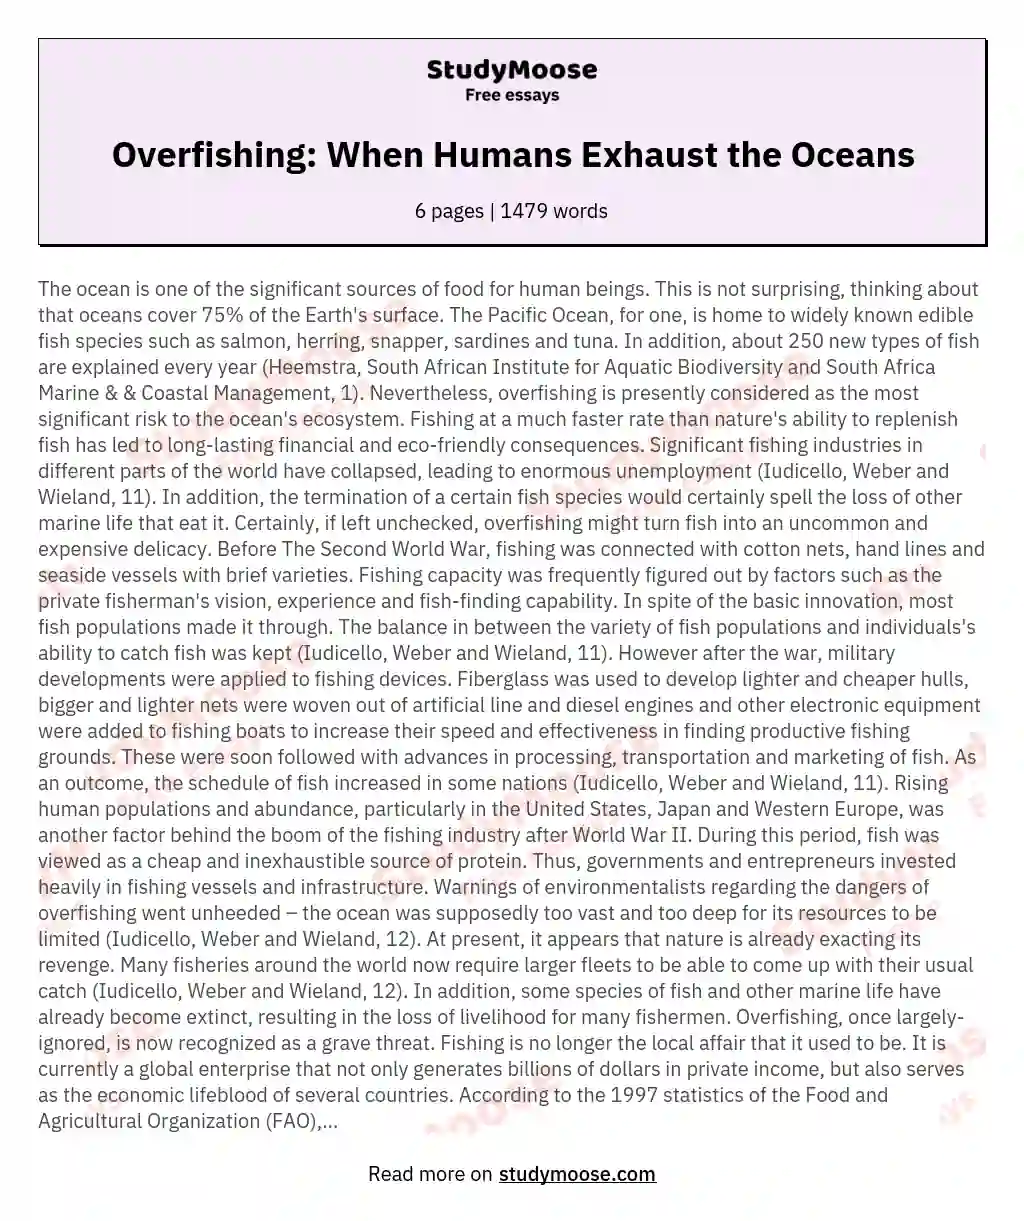 Overfishing: When Humans Exhaust the Oceans